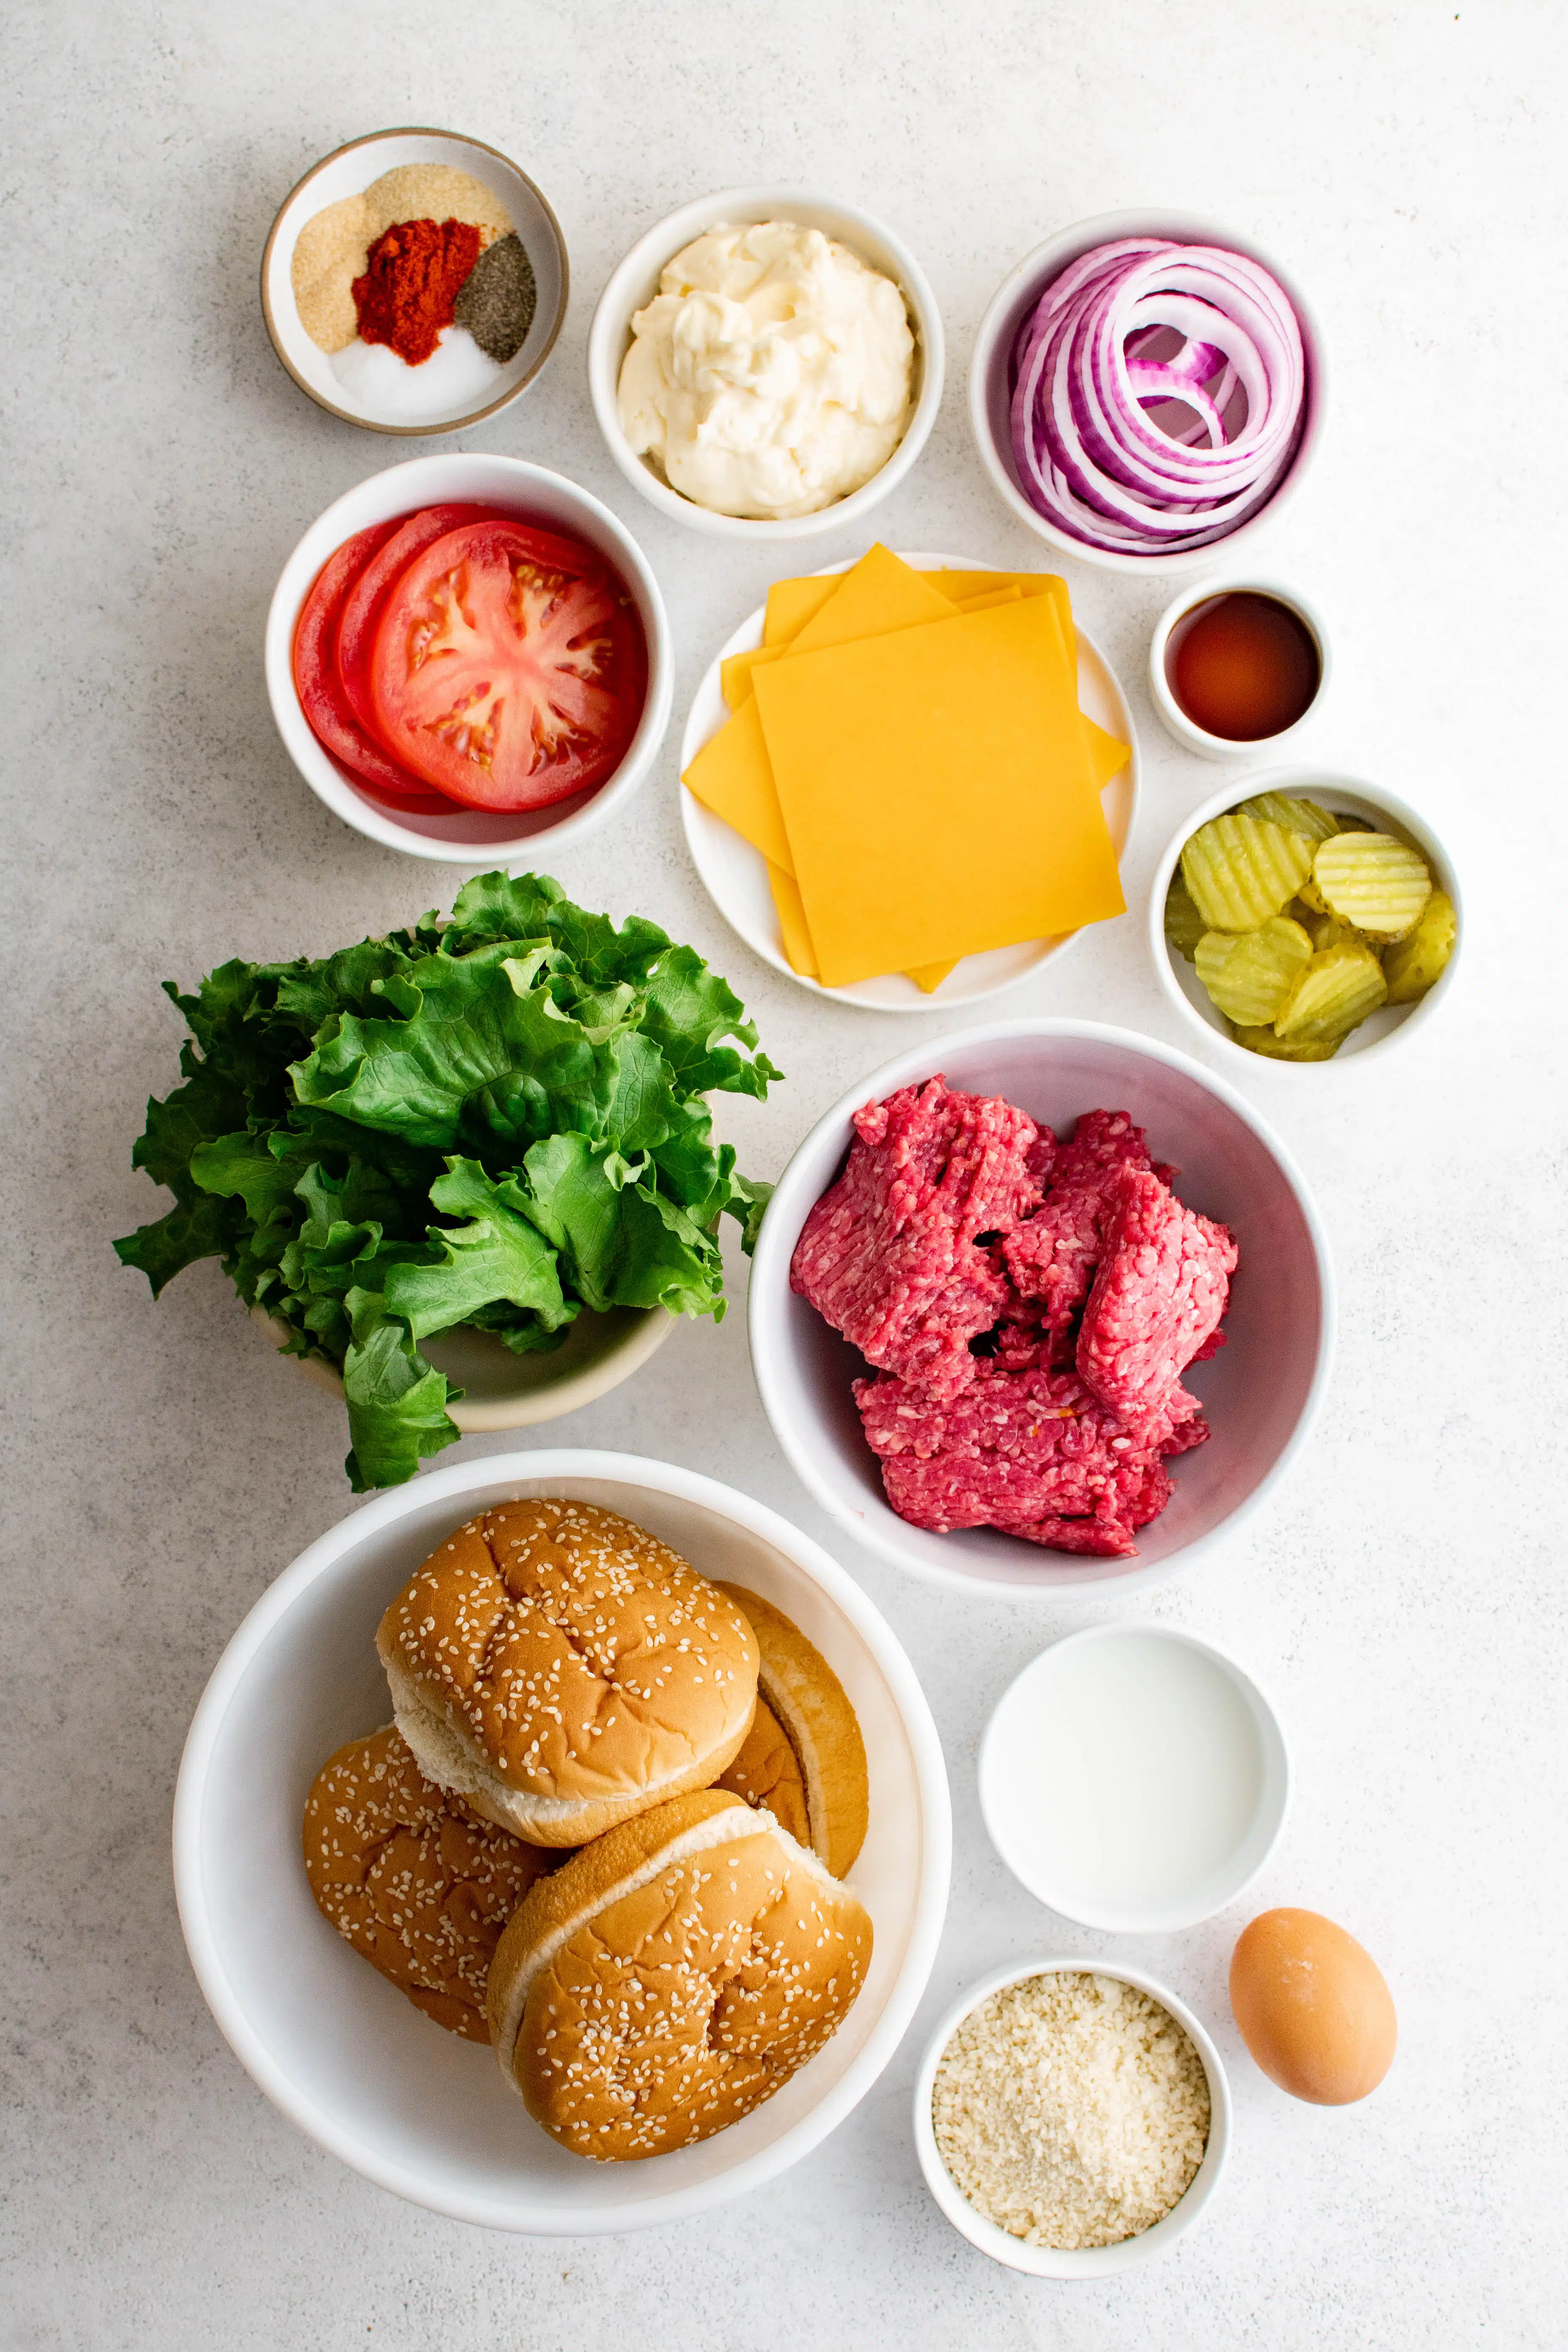 All of the ingredients to make the best hamburgers recipe plus the buns and toppings.